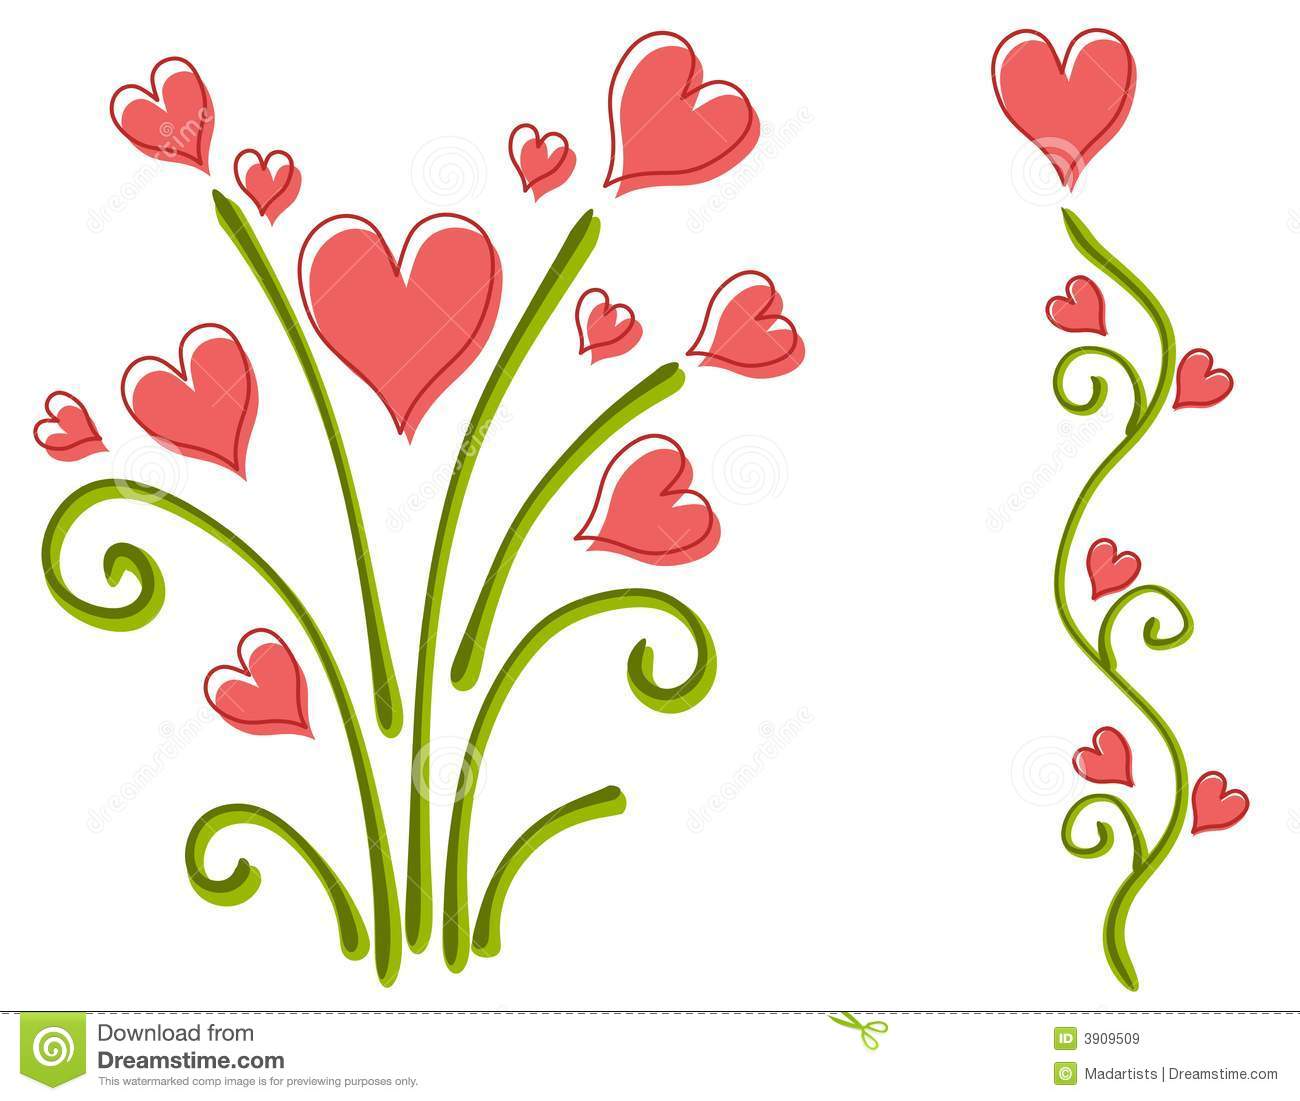 Clipart Flowers And Hearts   Clipart Panda   Free Clipart Images